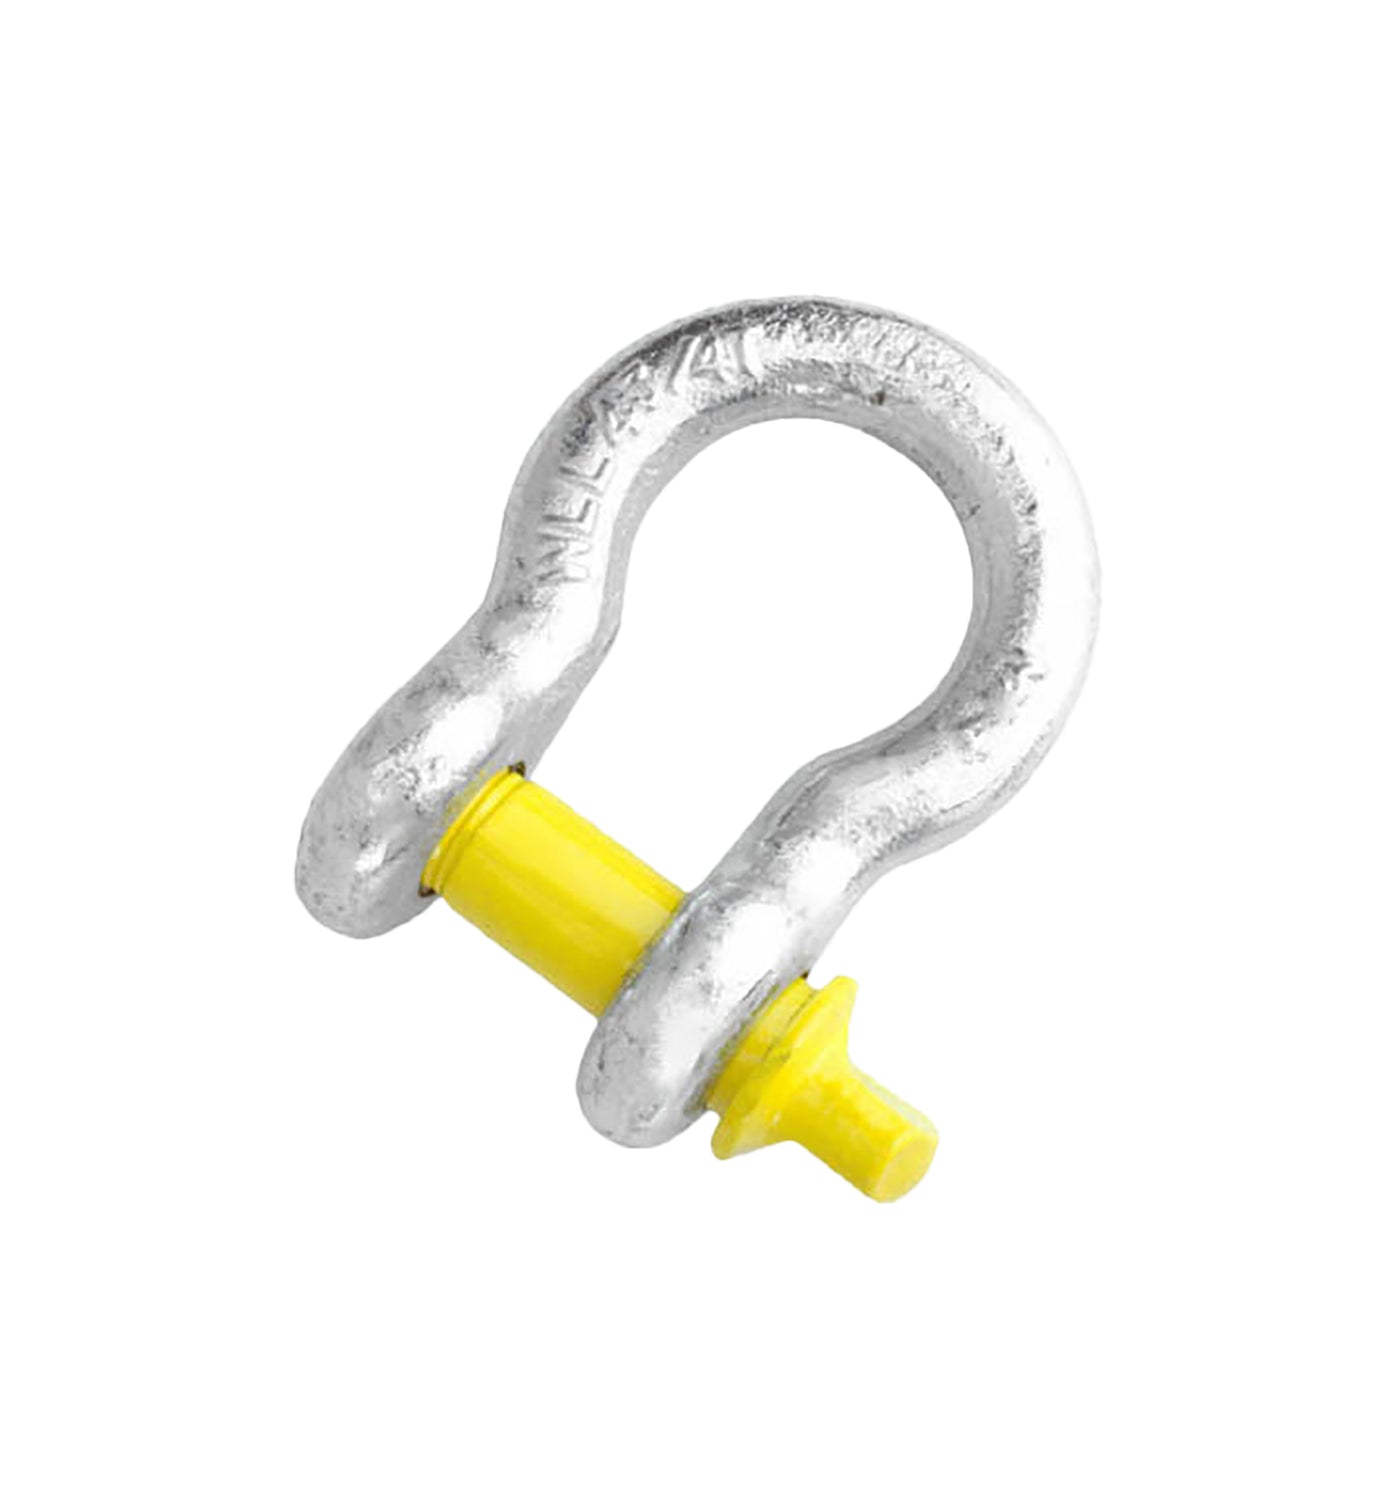 16mm Bow Shackle 3.25 Tonne 4Wd 4X4 Recovery Rated Ton Rescue Trailer Parts